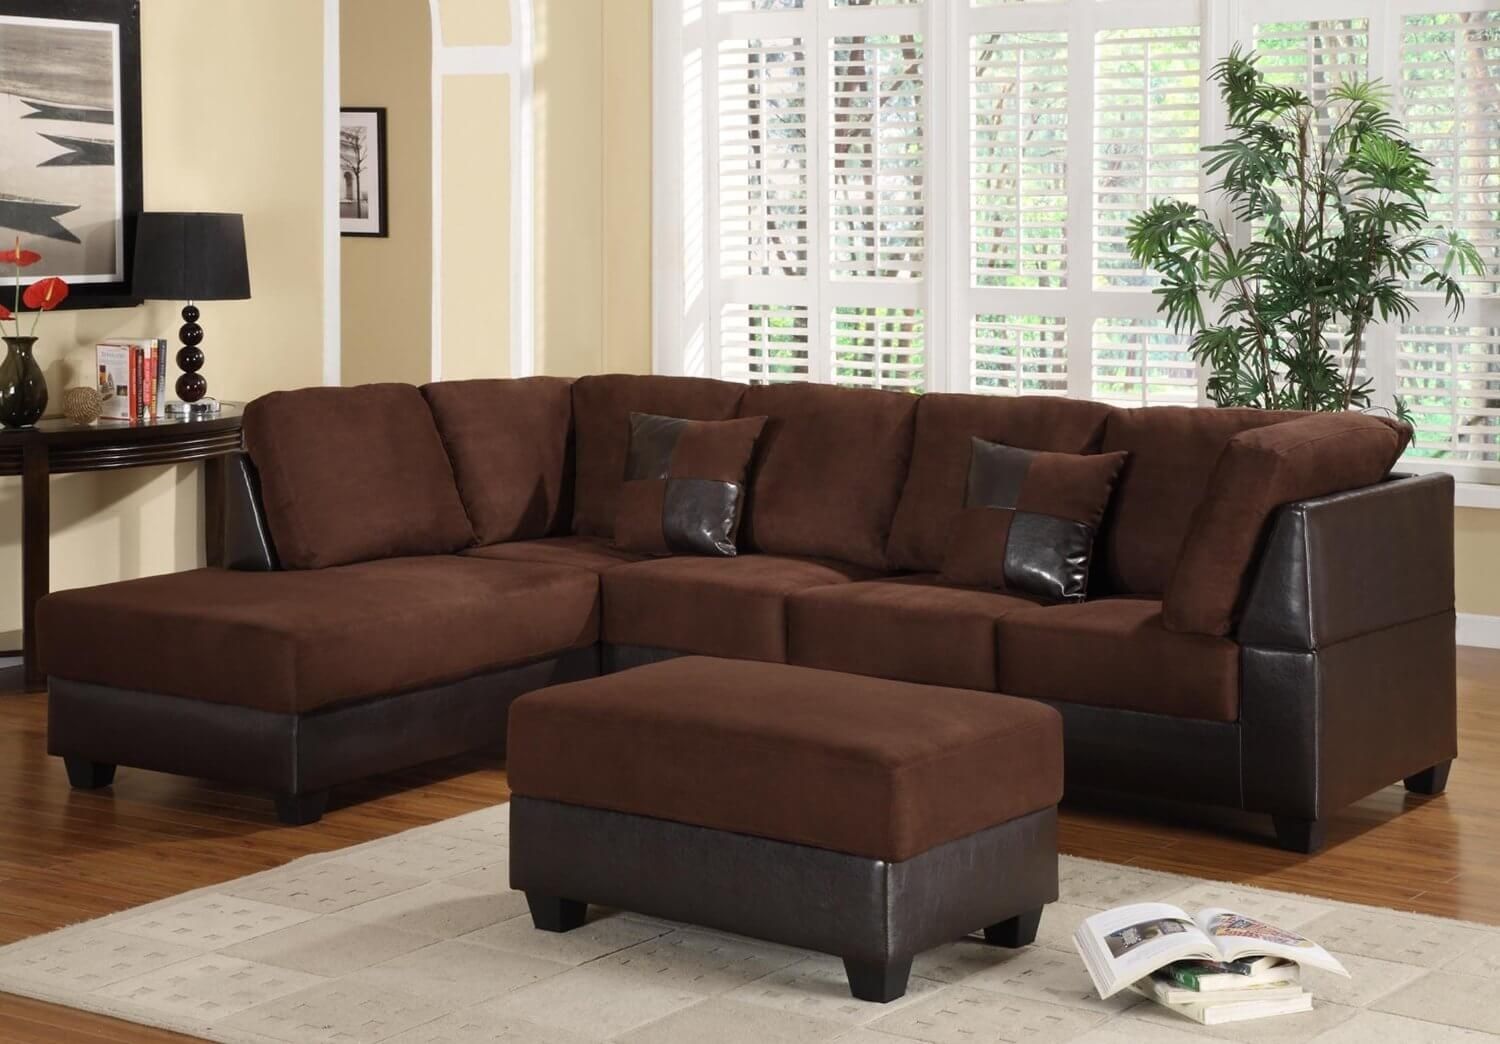 40 Cheap Sectional Sofas Under $500 For 2018 Intended For Sectional Sofas Under 500 (Photo 1 of 15)